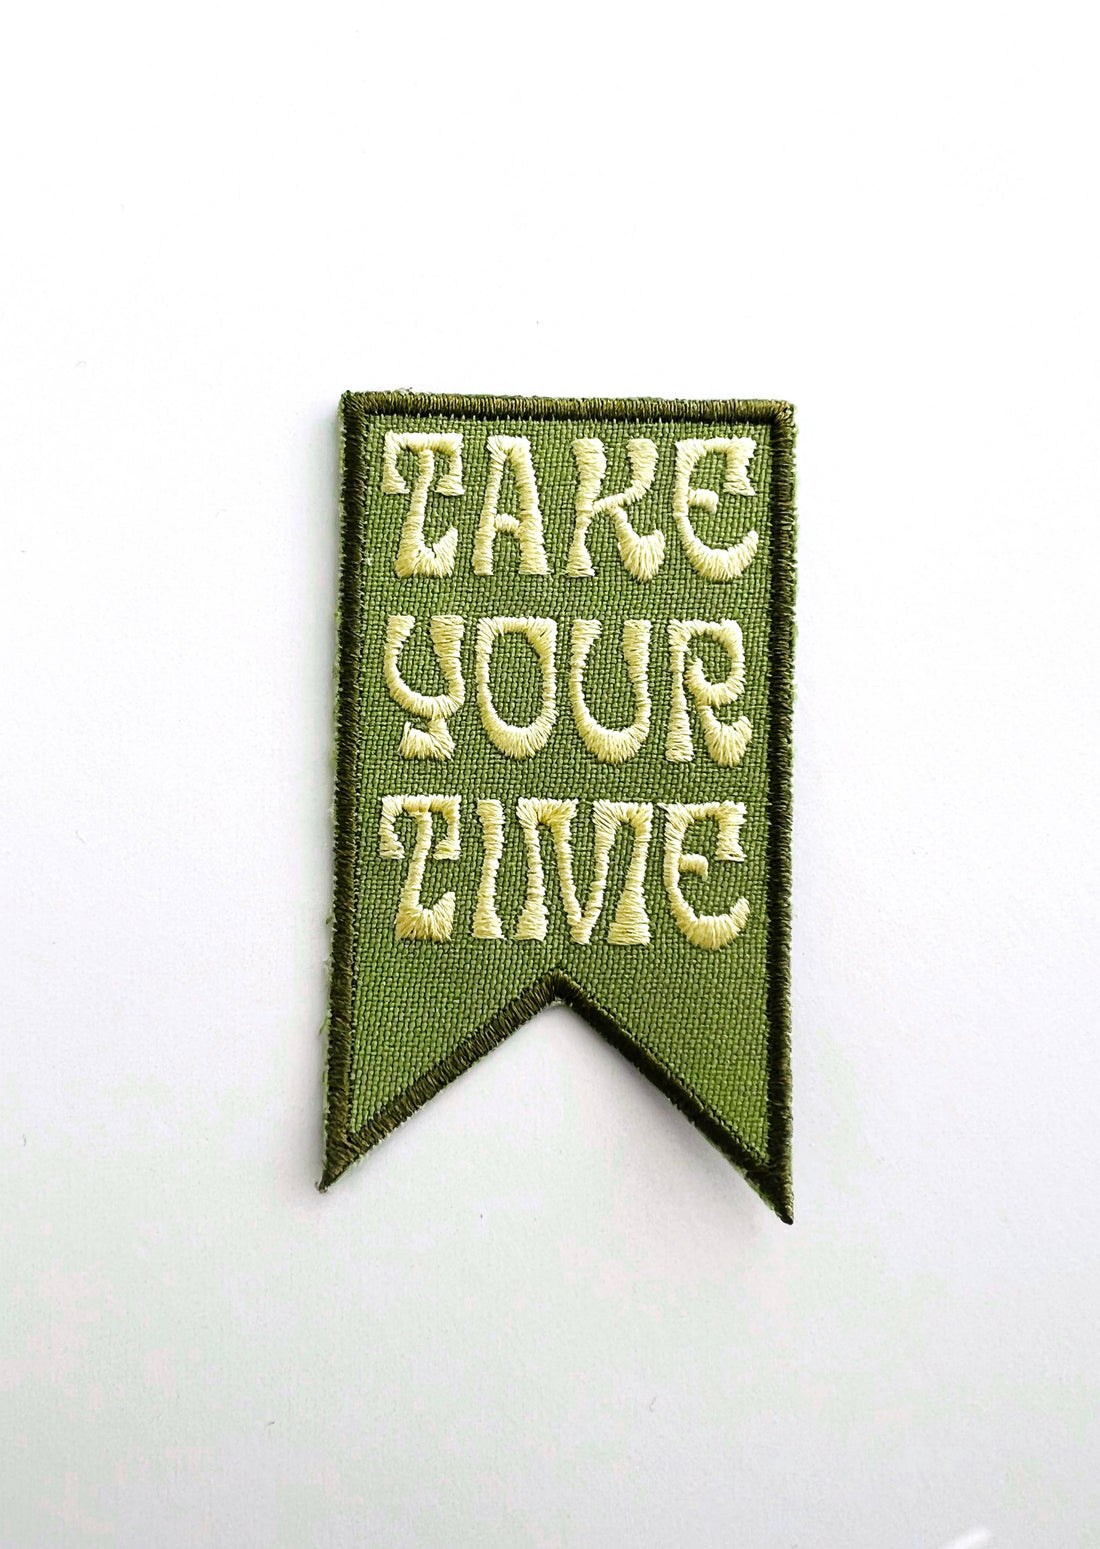 Take Your Time Embroidered Iron-On Patch